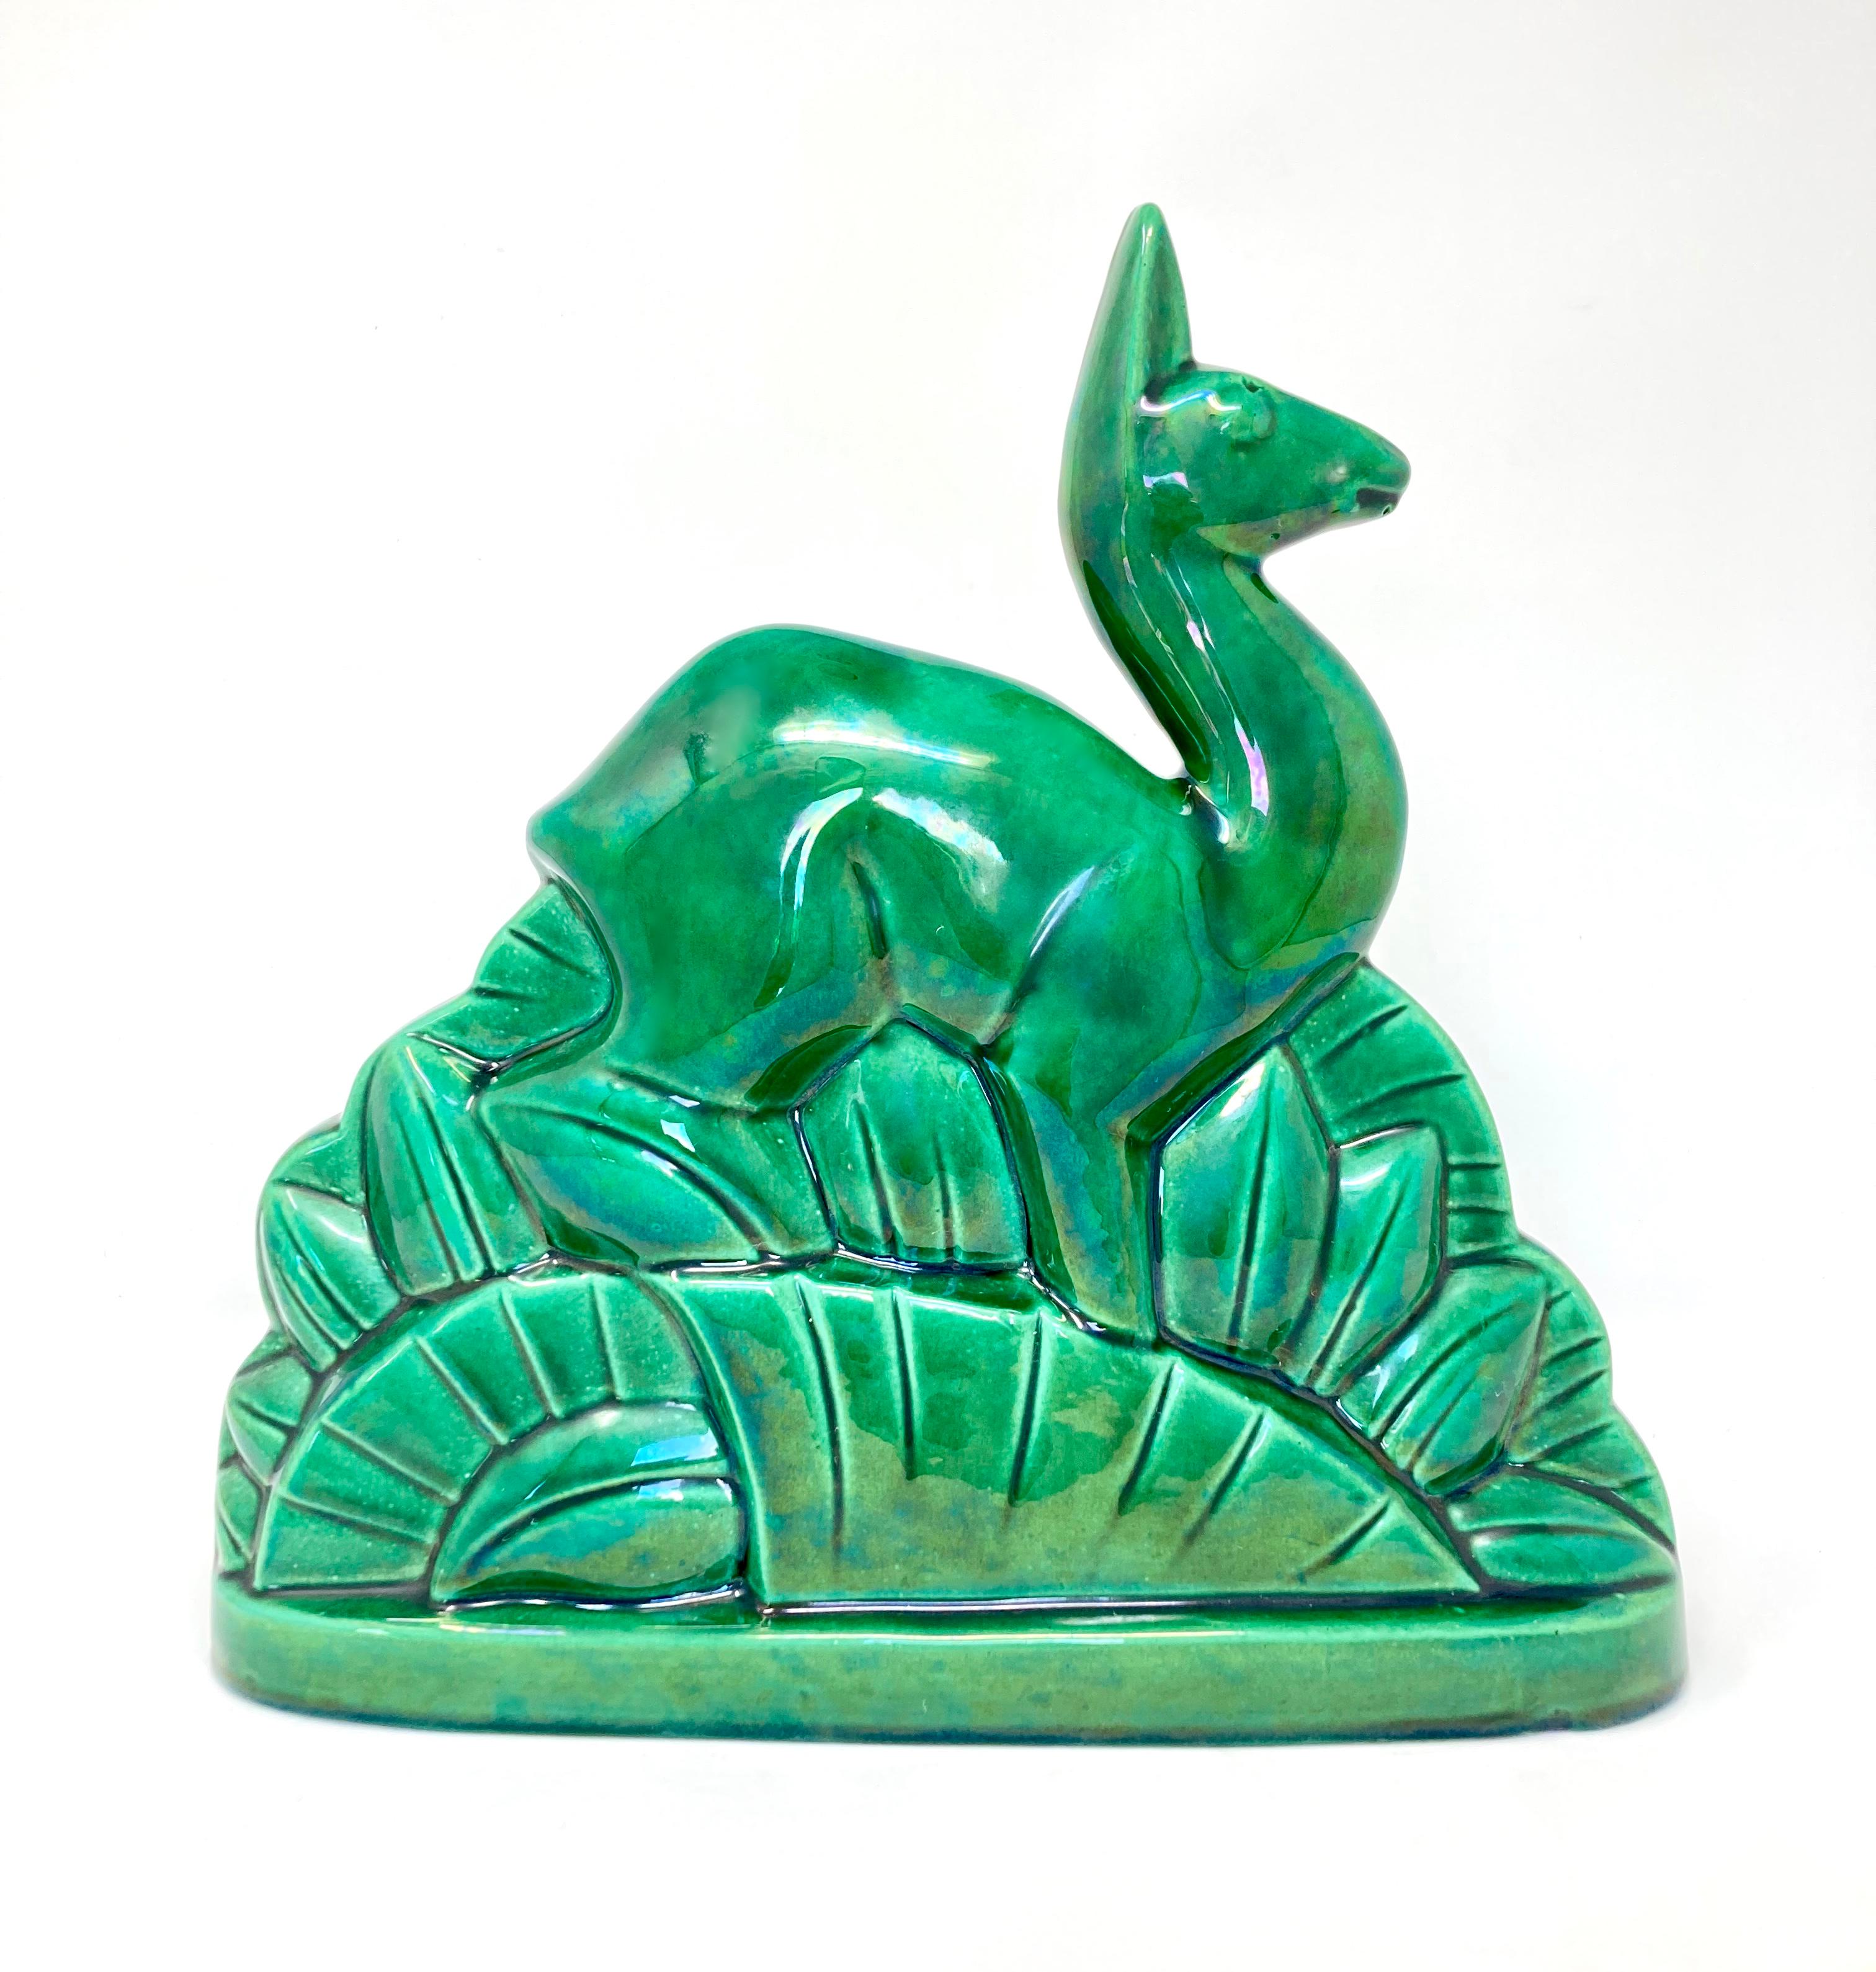 1930s Art Deco French Faience Centerpiece by Charles Lemanceau for Saint-Clément In Good Condition For Sale In COLMAR, FR